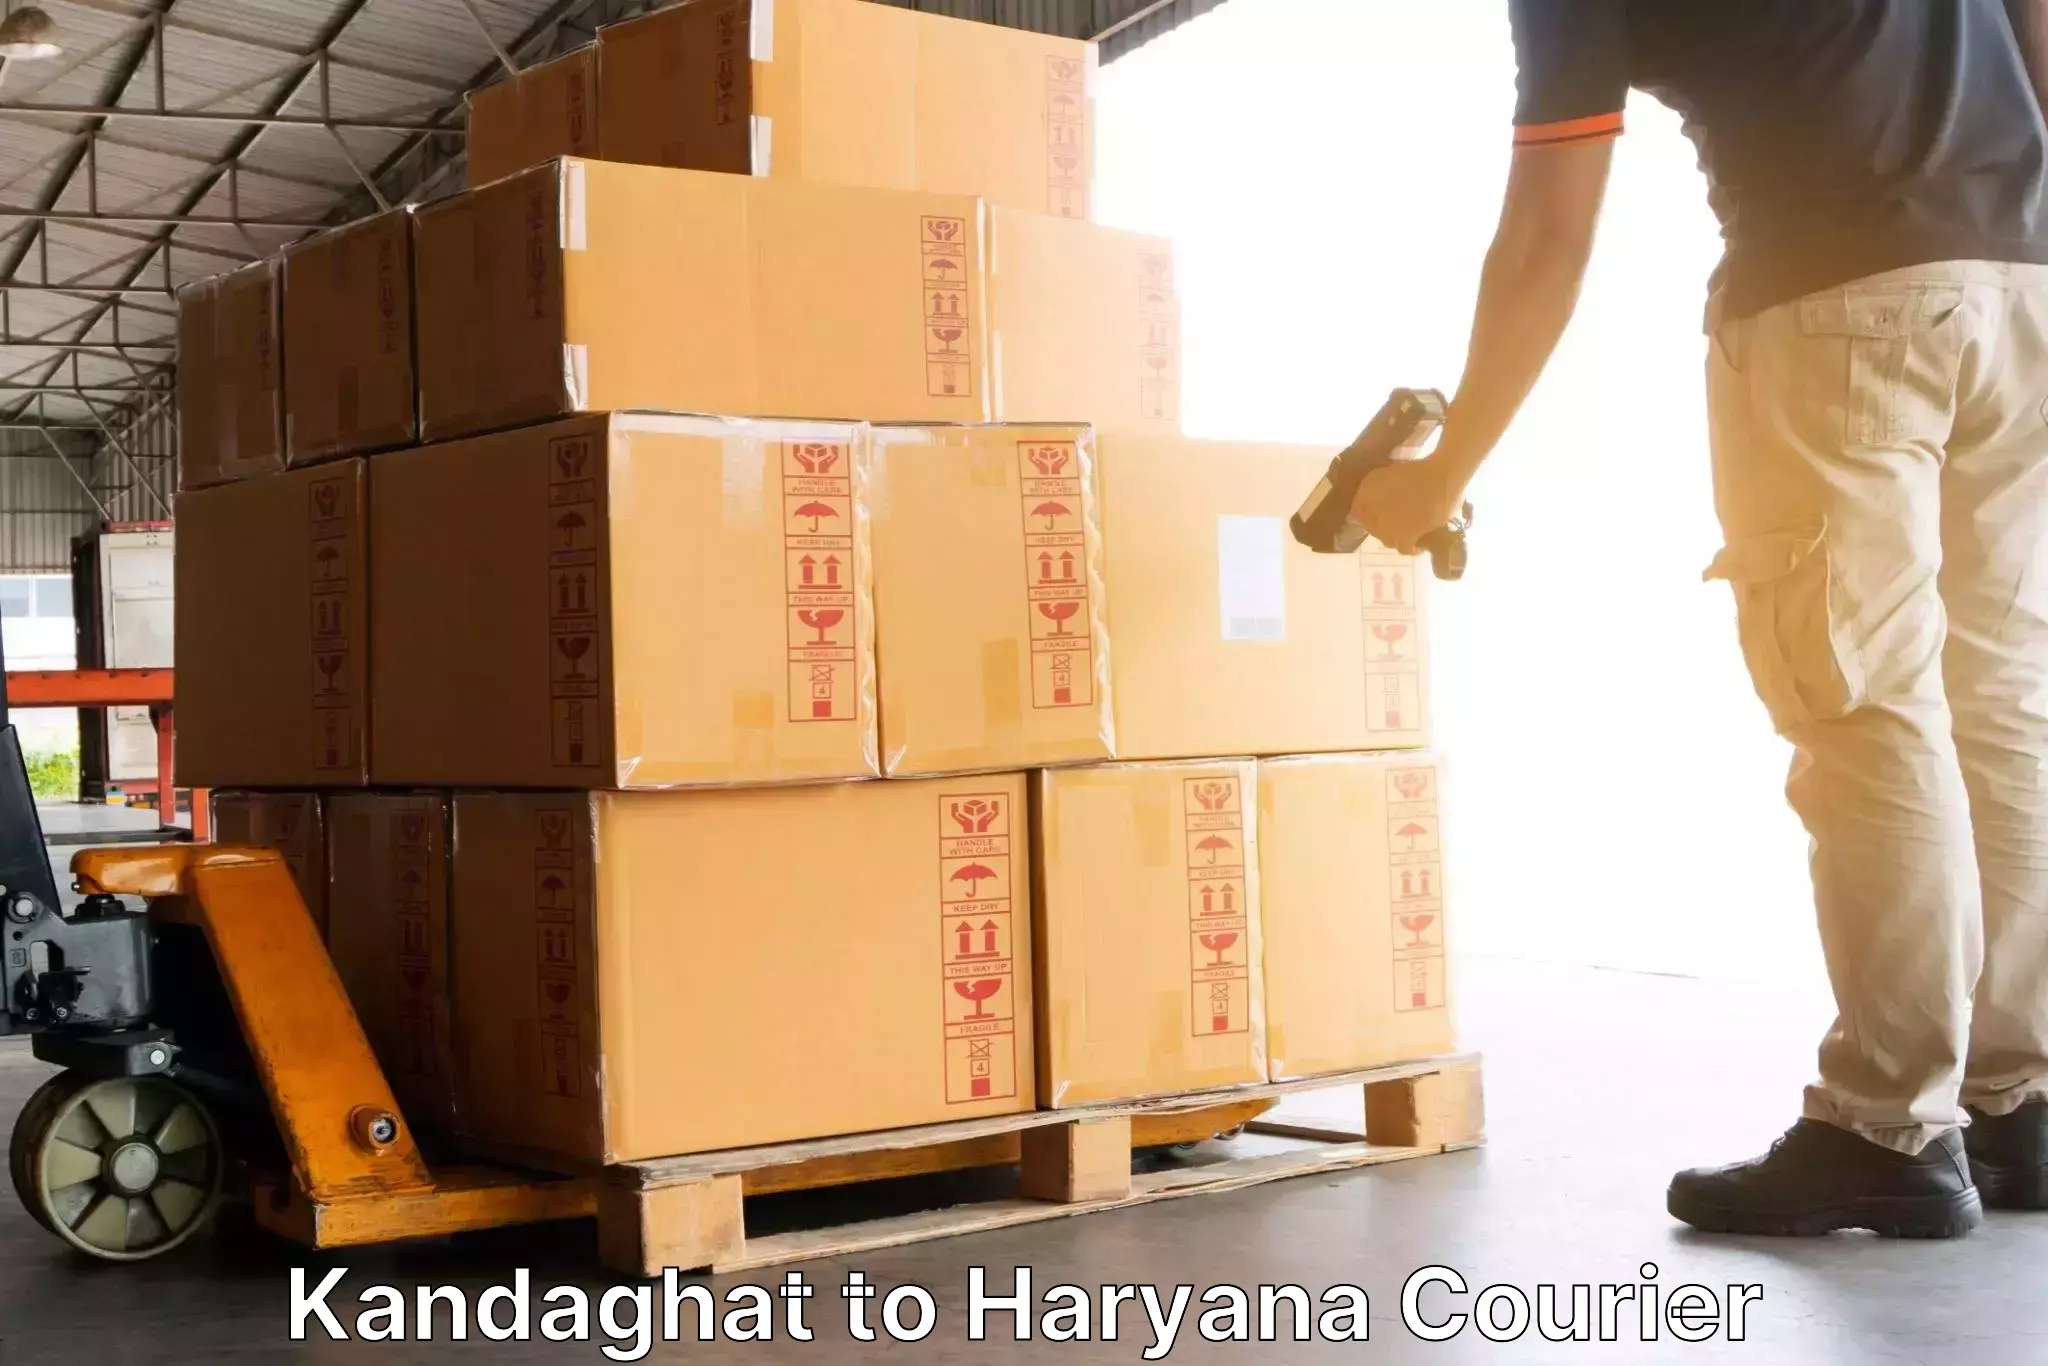 Courier service efficiency Kandaghat to Ellenabad